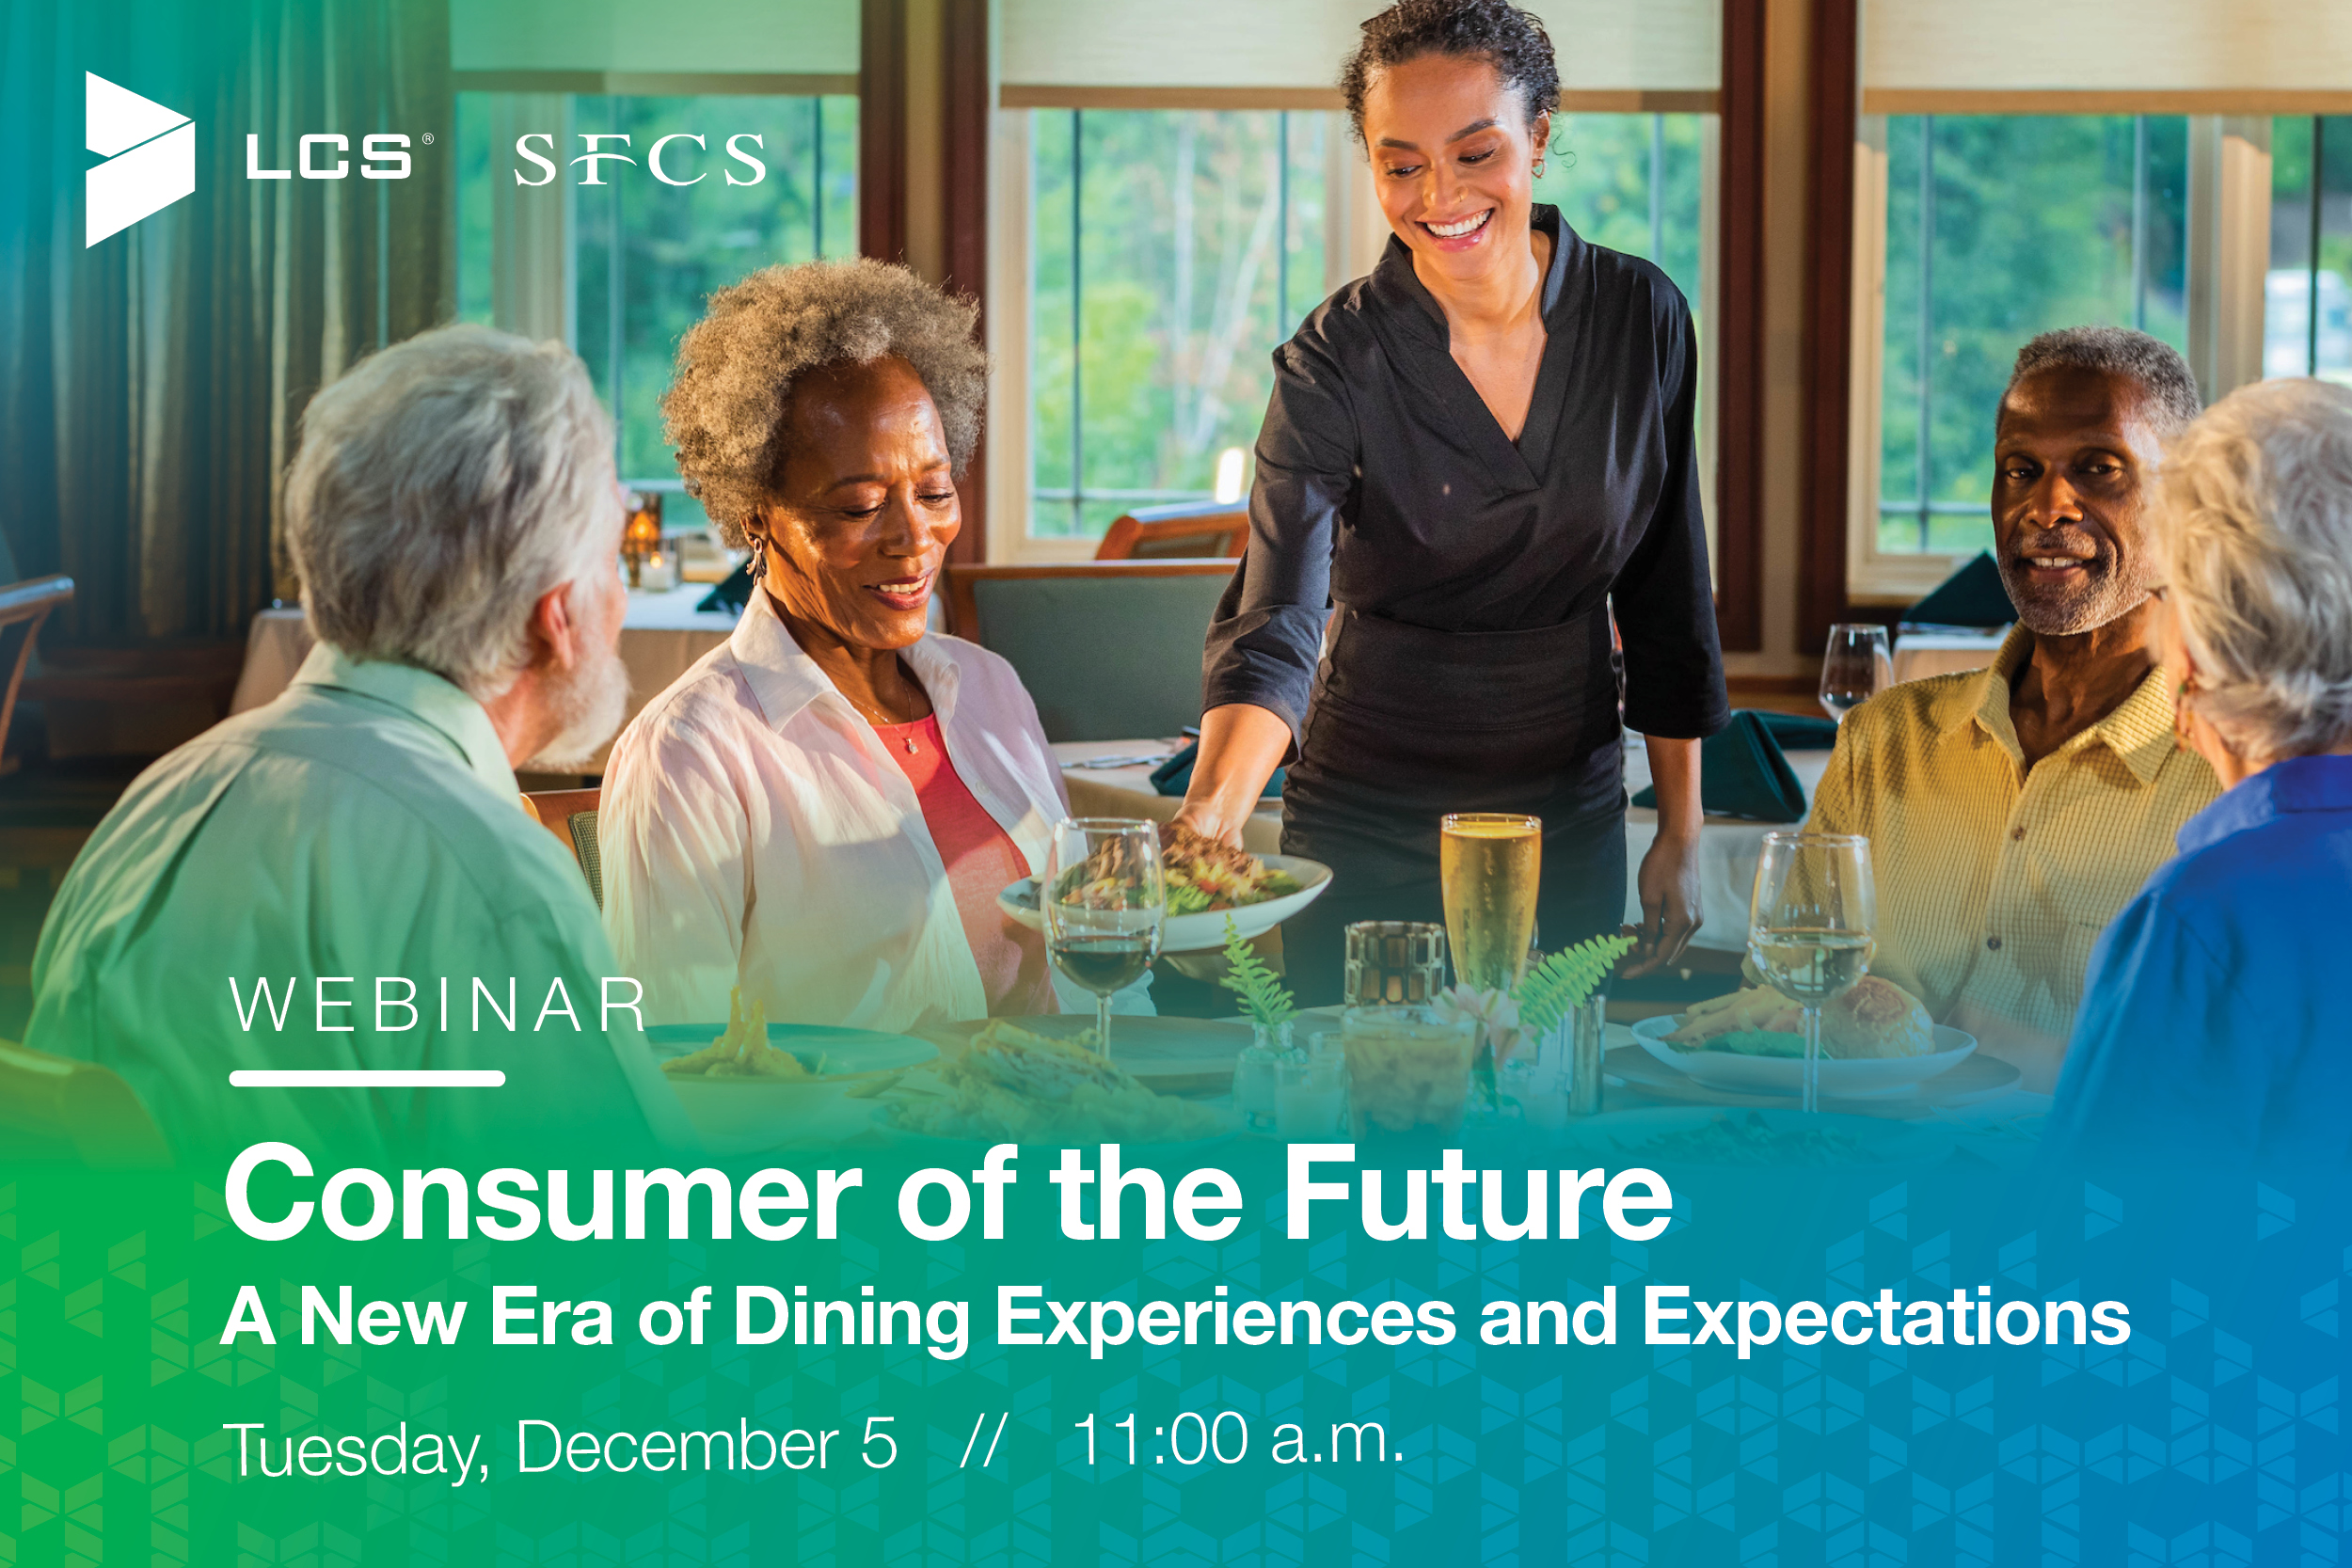 Consumer of the Future: A New Era of Dining Experiences and Expectations